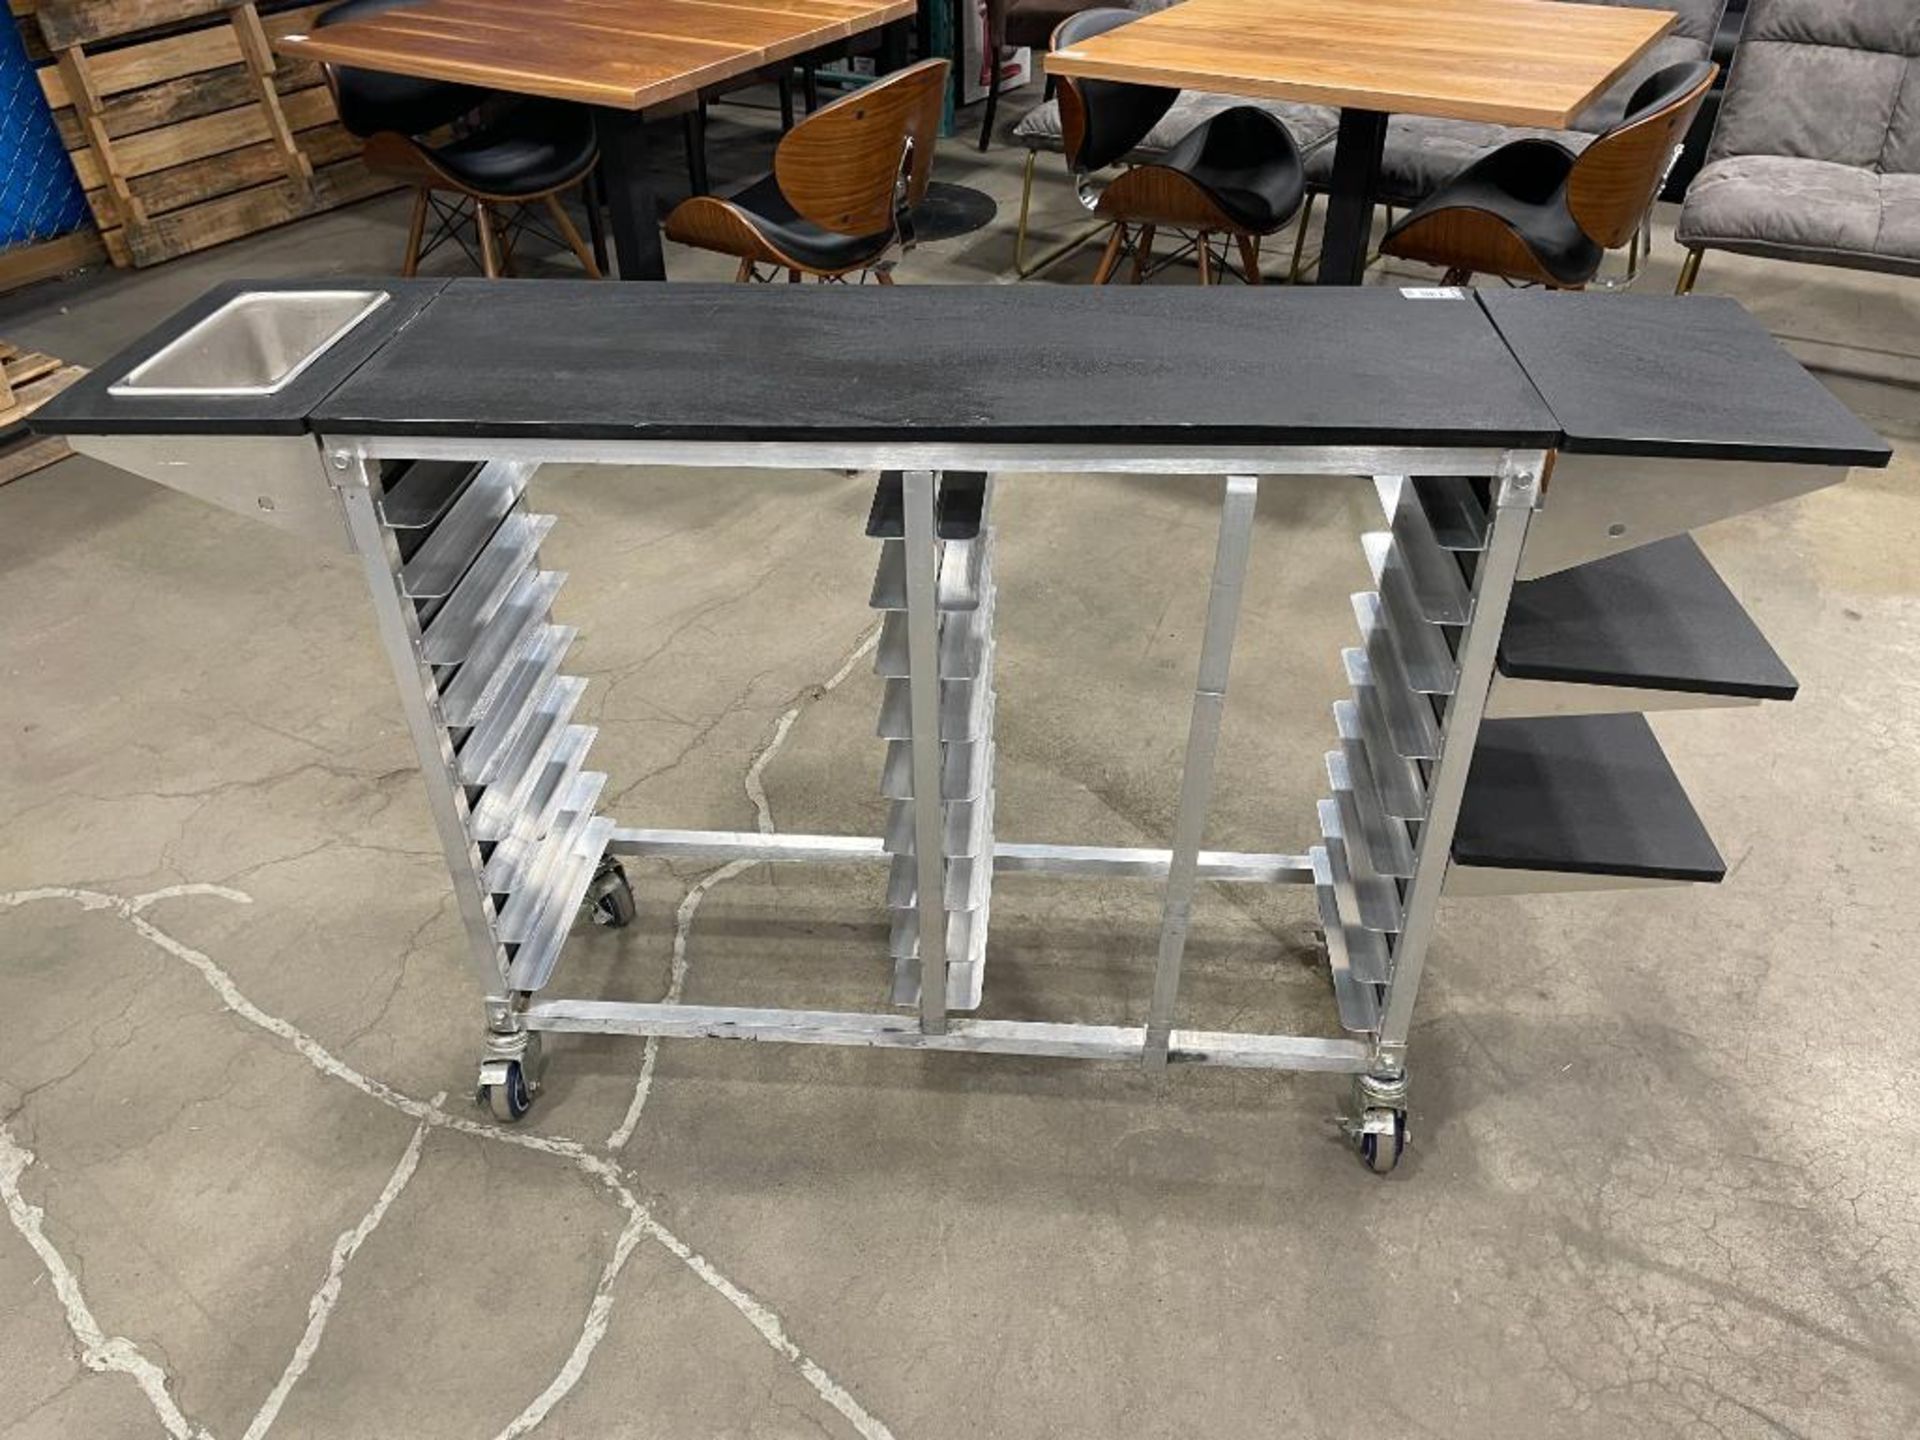 COMMERCIAL FOOD SERVICE CART WITH 18-SLOTS FOR HALF SIZE BUN PANS - Image 2 of 7